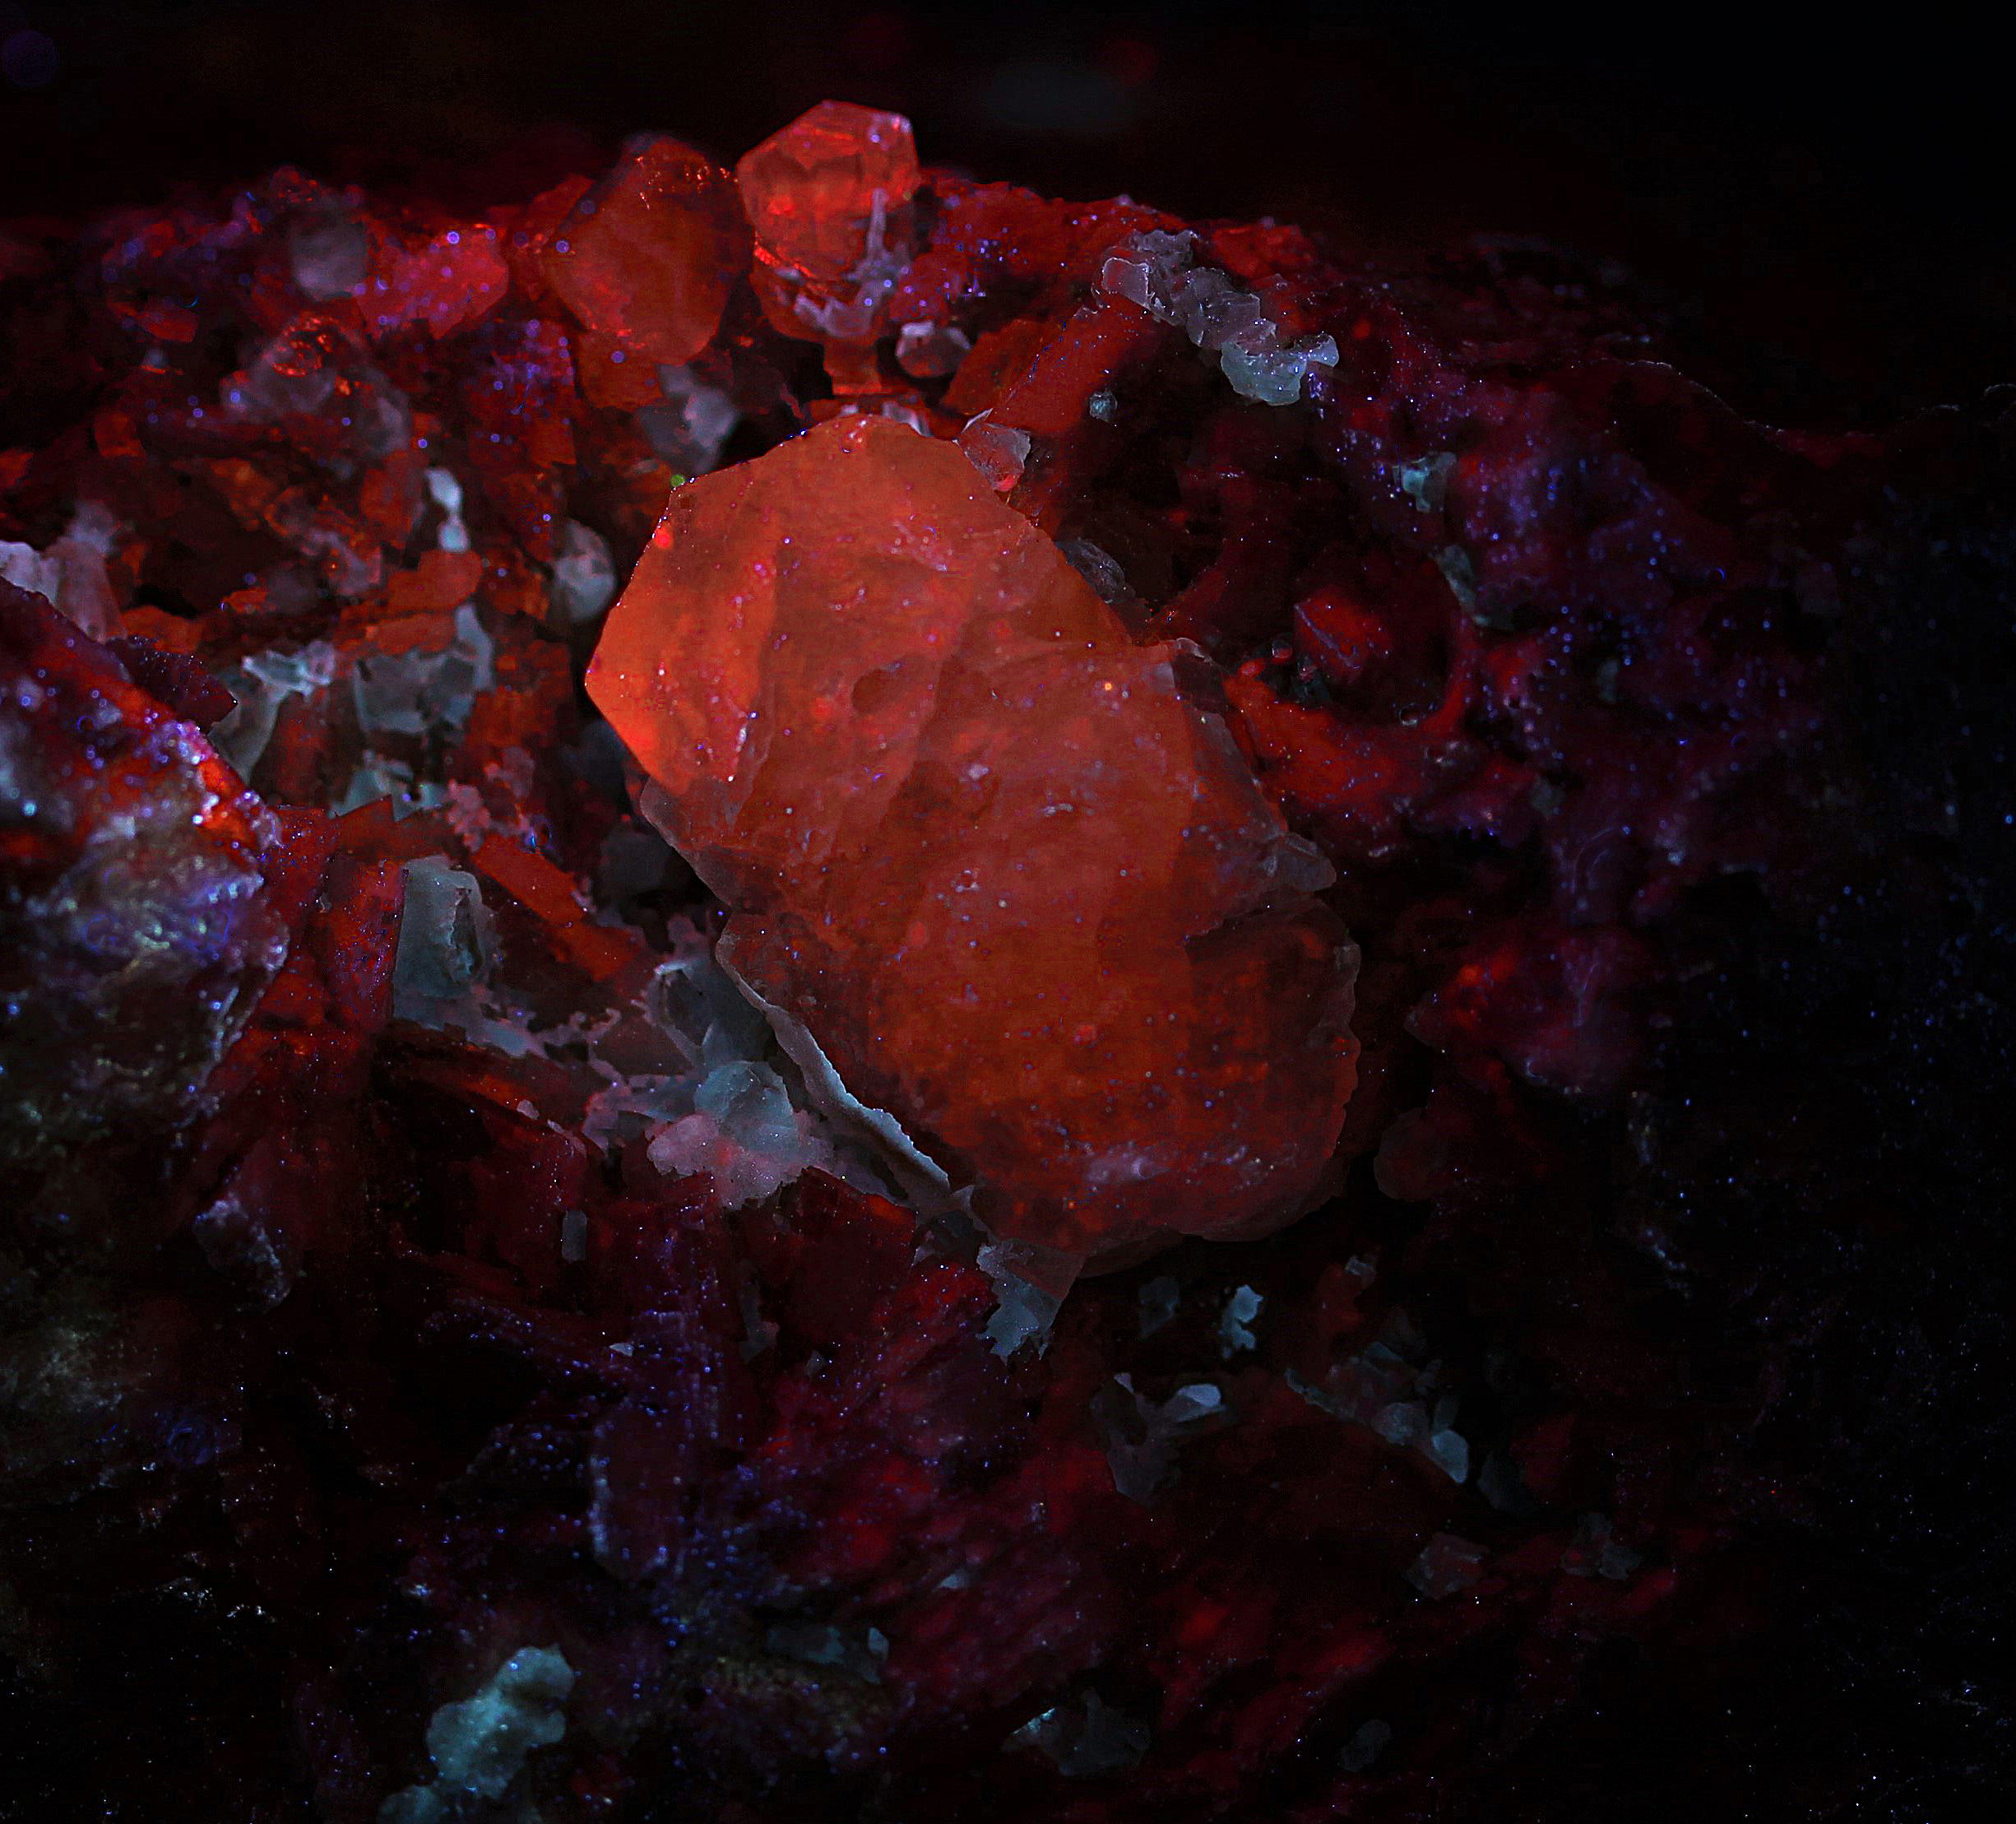 Calcite crystals, dolomite with carbonate coating from the Lang Shaft, Franklin, NJ  under longwave UV Light